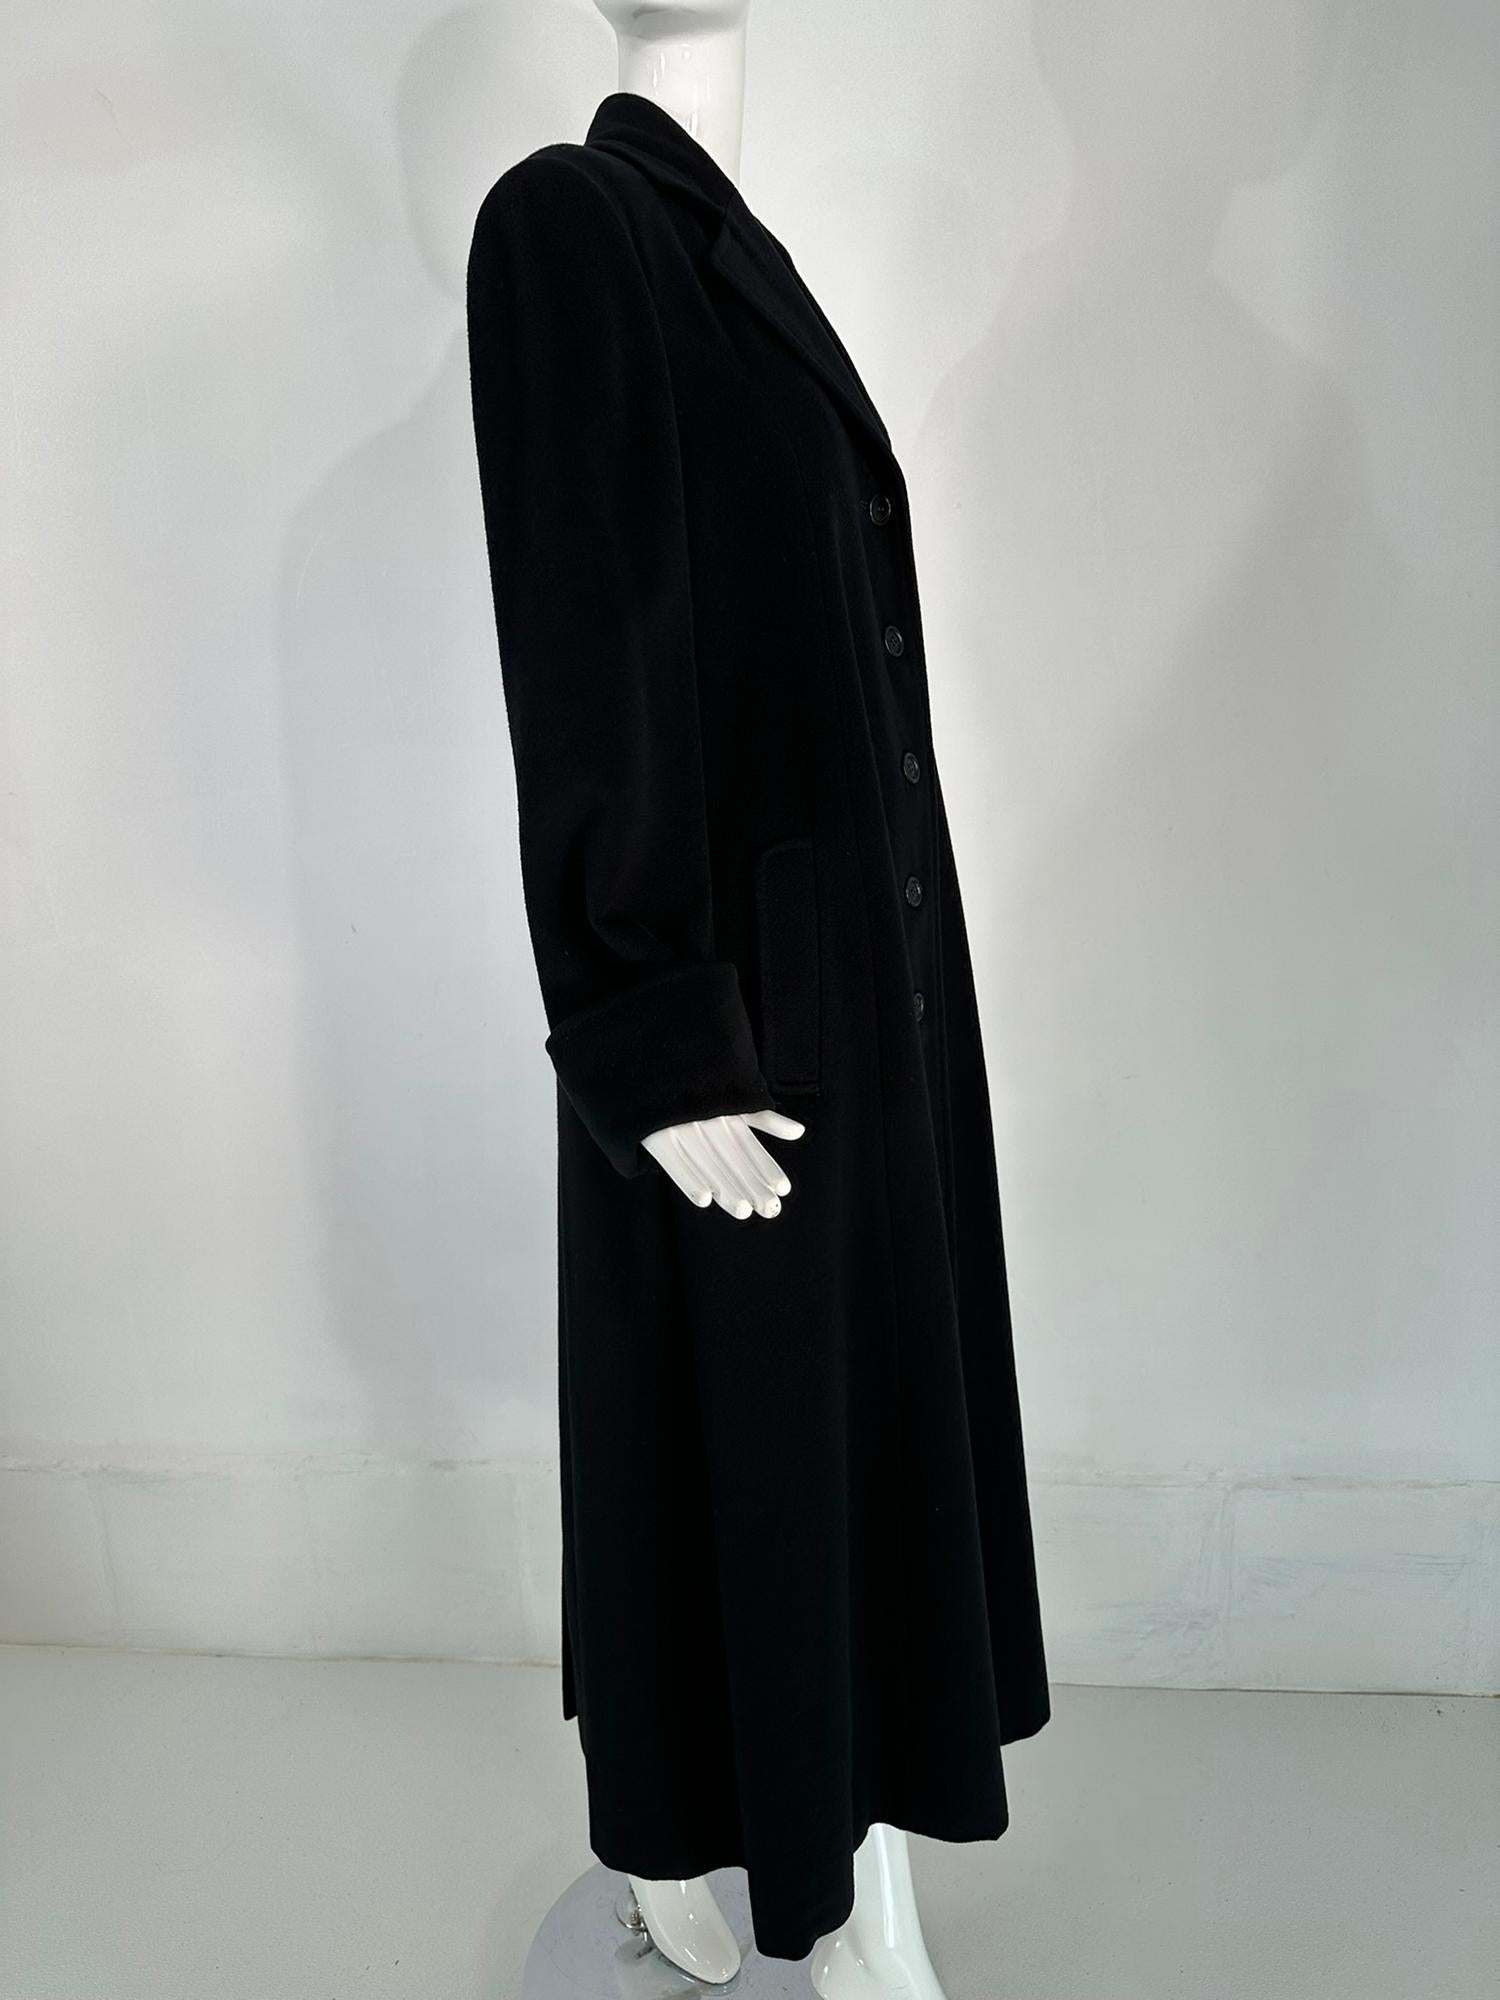 Bergdorf Goodman Black Cashmere Over Coat Deep Center Hem Vent  In Good Condition For Sale In West Palm Beach, FL